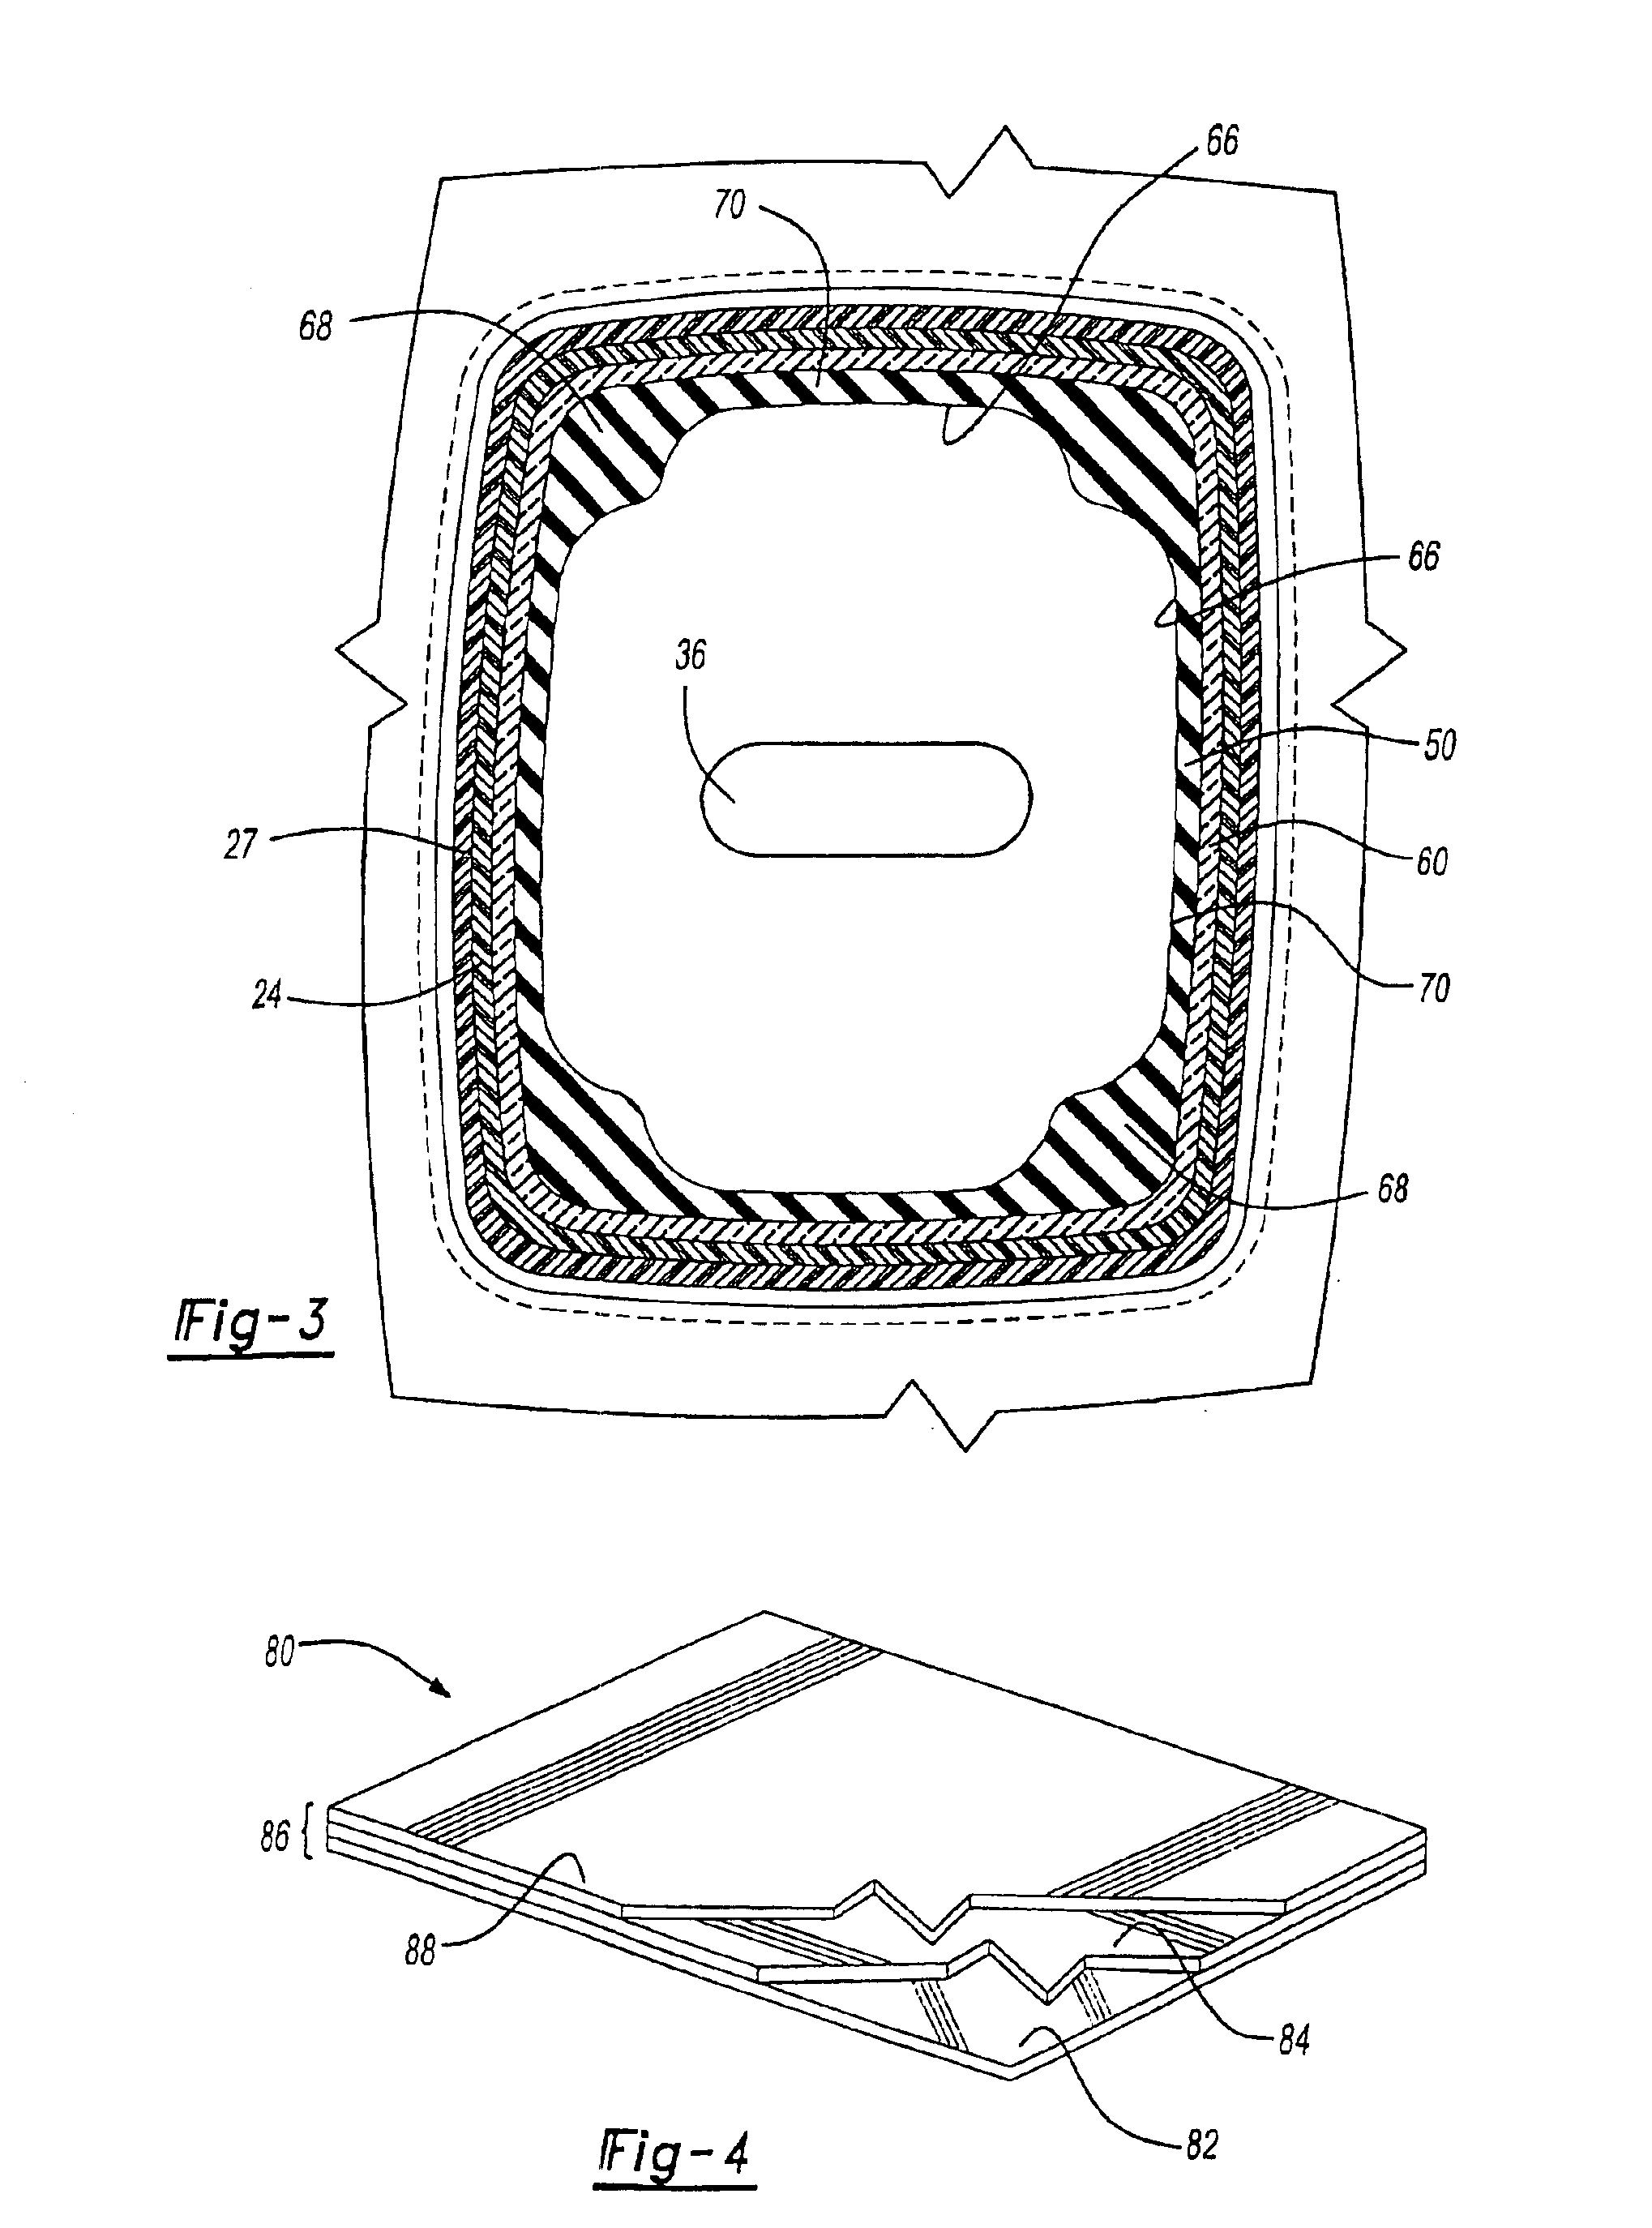 Method of forming a component for a control panel